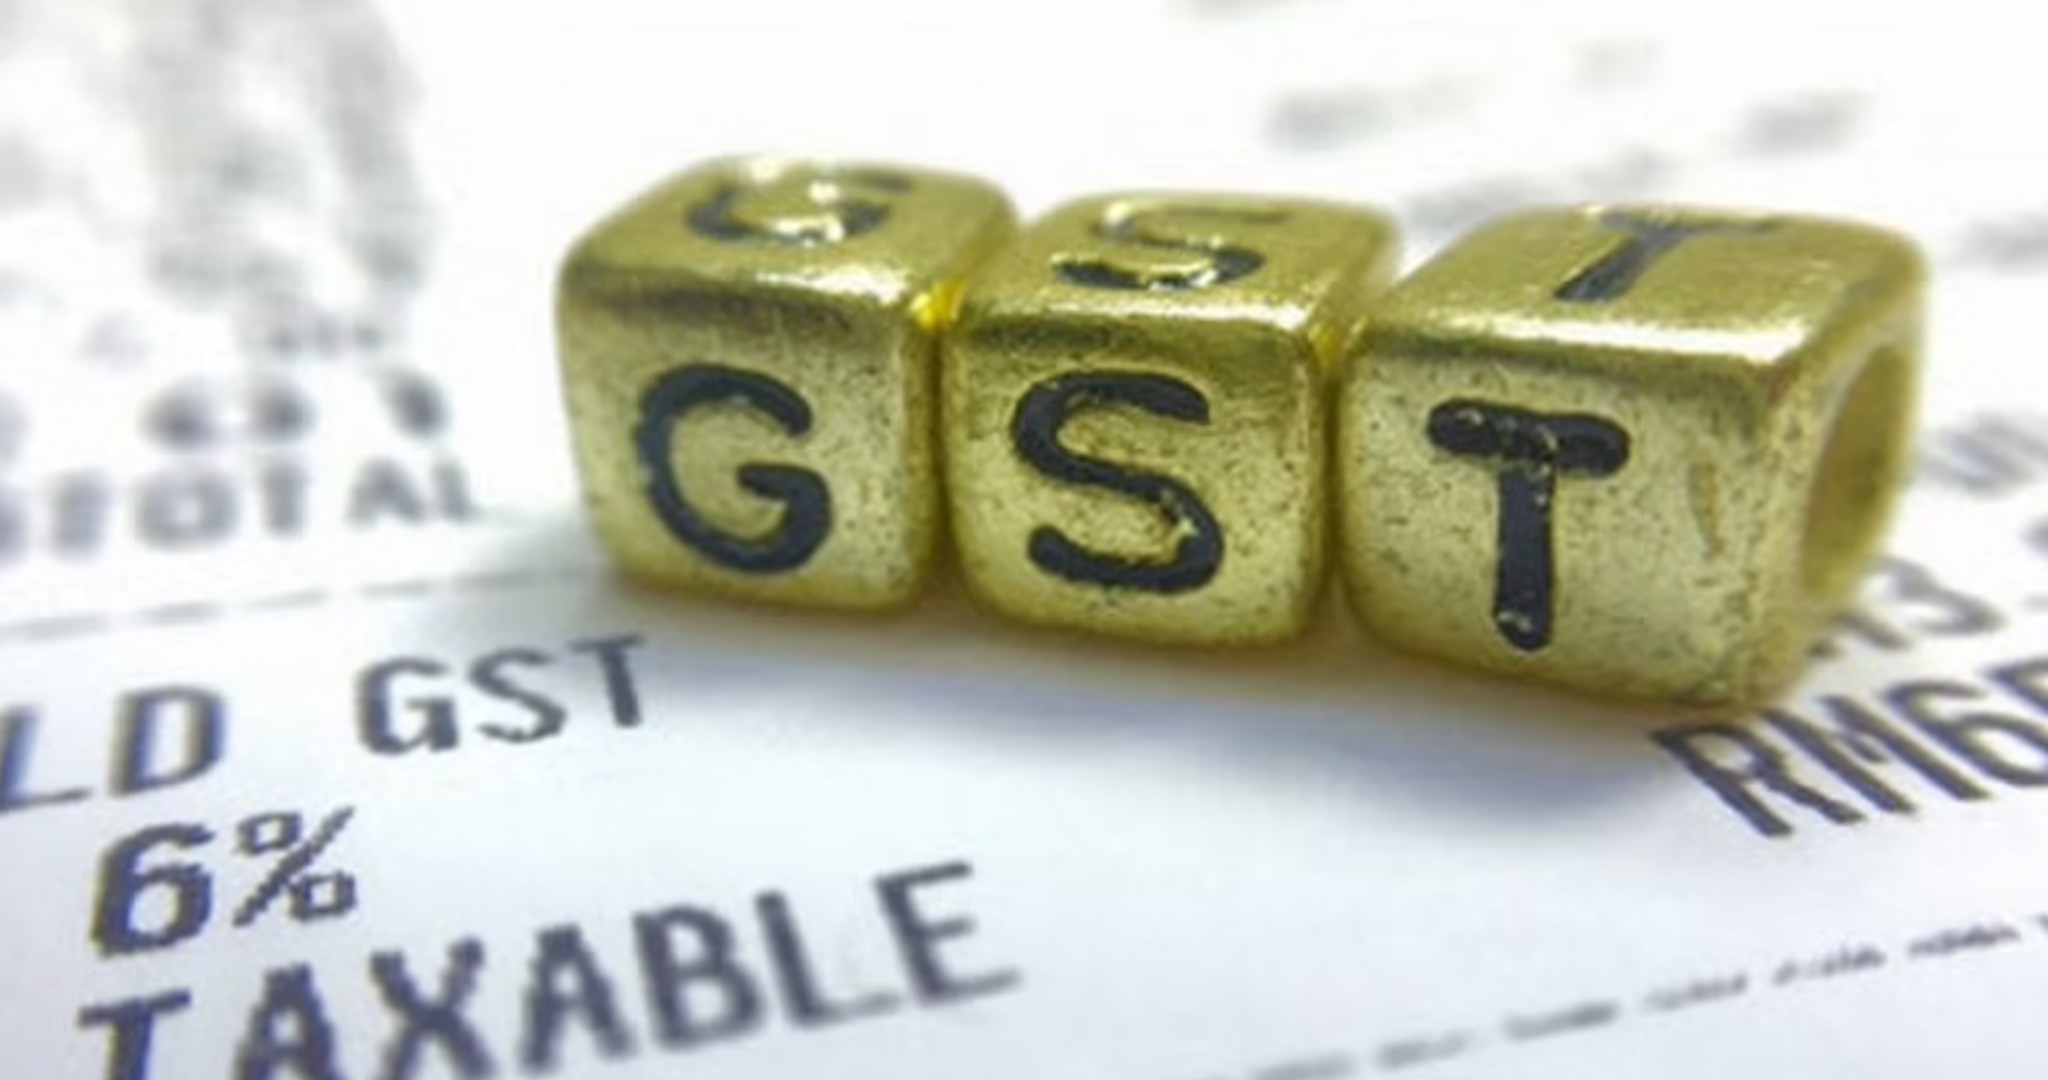 GST Calculator: Make Calculation Easier for Your Small Business